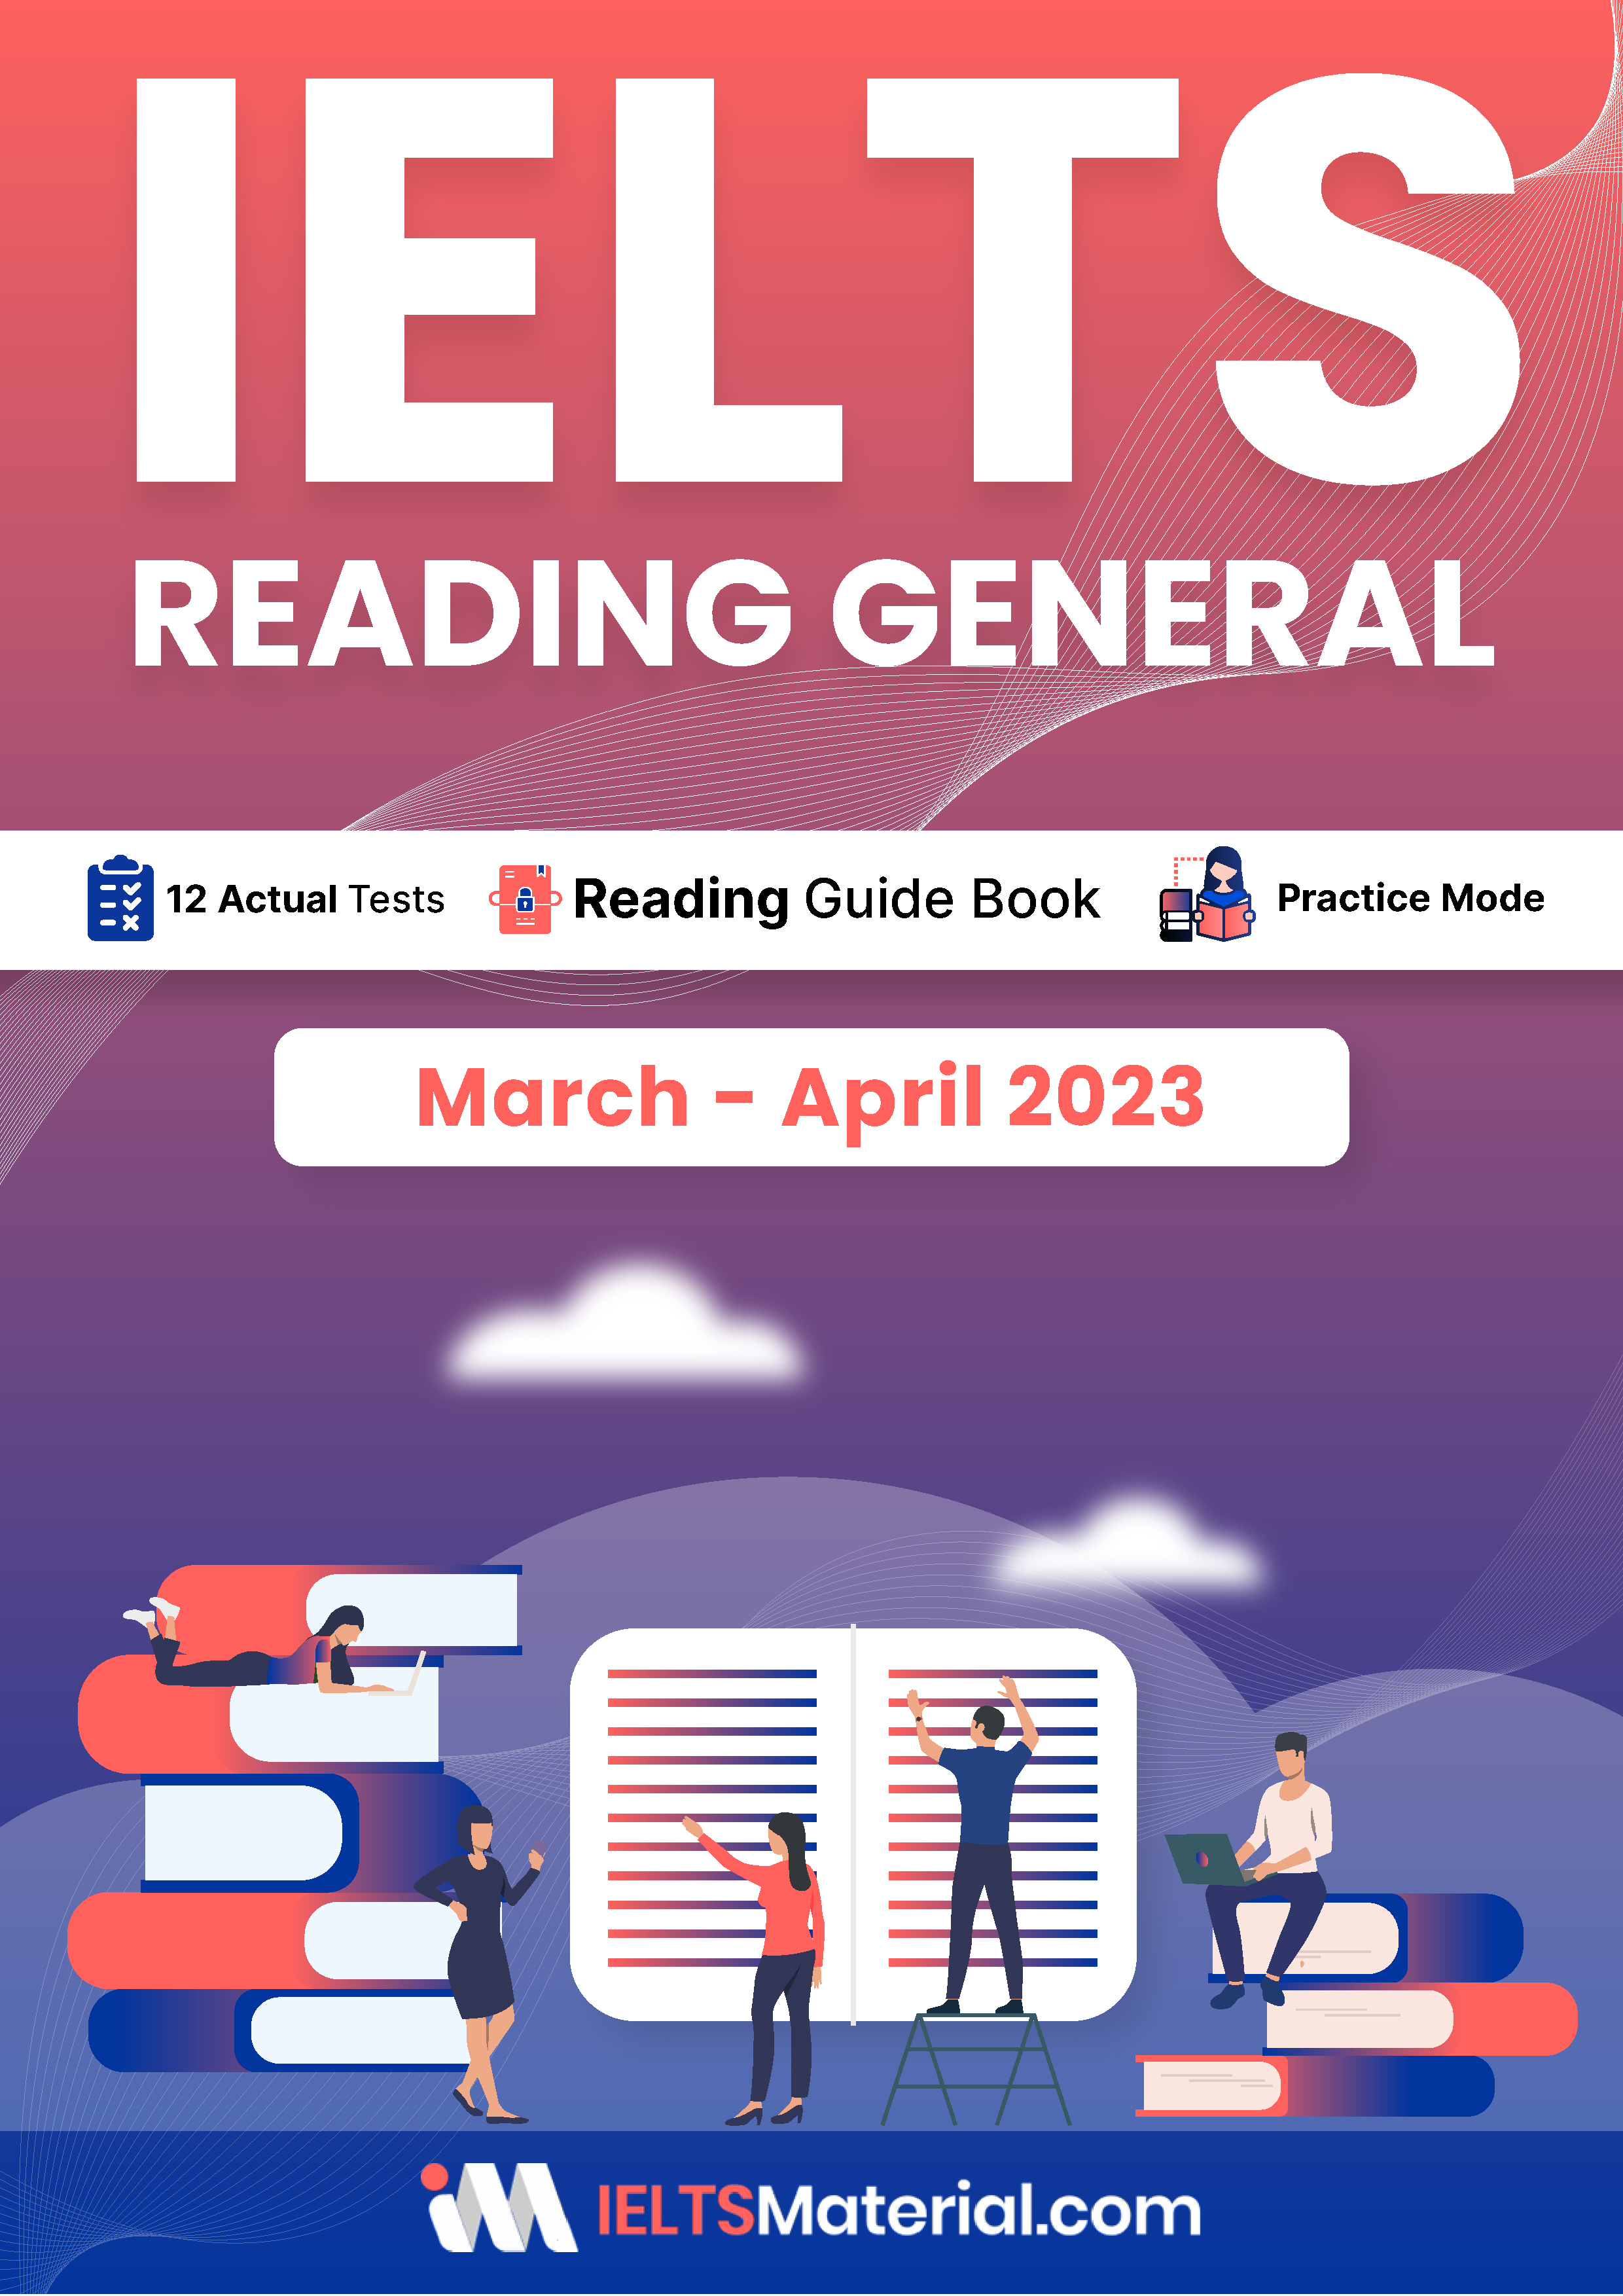 The Ultimate Guide to IELTS General Reading: Tips, Tricks, and Practice (Mock) Tests (March-April 2023)